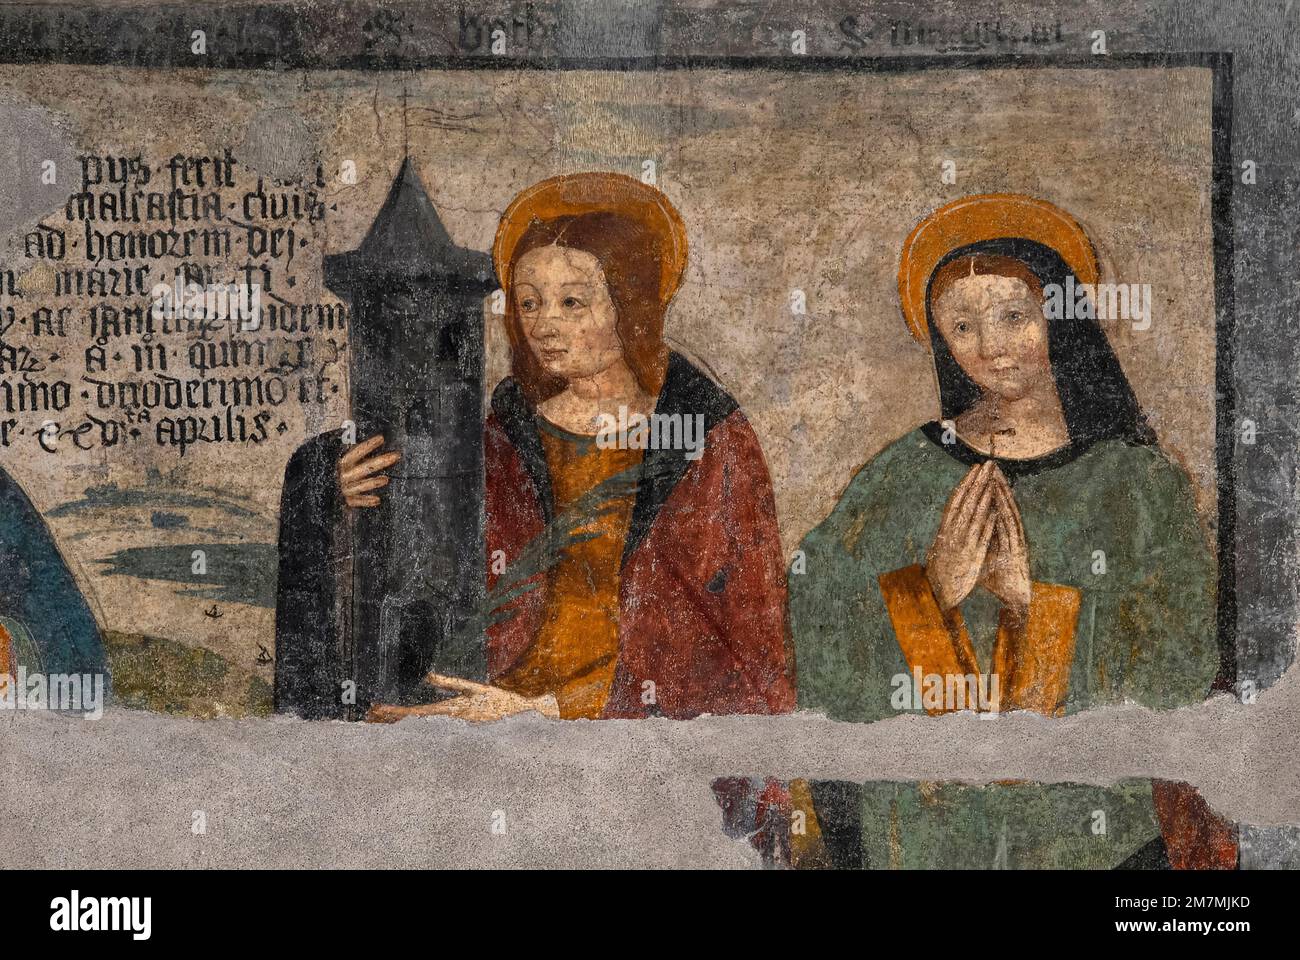 Female saints Barbara (left) and Margherita or Margaret of Cortona depicted in damaged Renaissance fresco, painted in 1512, on west front of deconsecrated Cappella di San Grato (Chapel of St Gratus) in Via Jean-Baptiste De Tillier in the historic centre of Aosta, regional capital of the Valle d’Aosta in northwest Italy.  Saint Barbara holds a three-windowed tower.  The tower symbolises Barbara’s imprisonment by her father.  The three windows - which she ordered be inserted in her prison - symbolise the Holy Trinity. Stock Photo